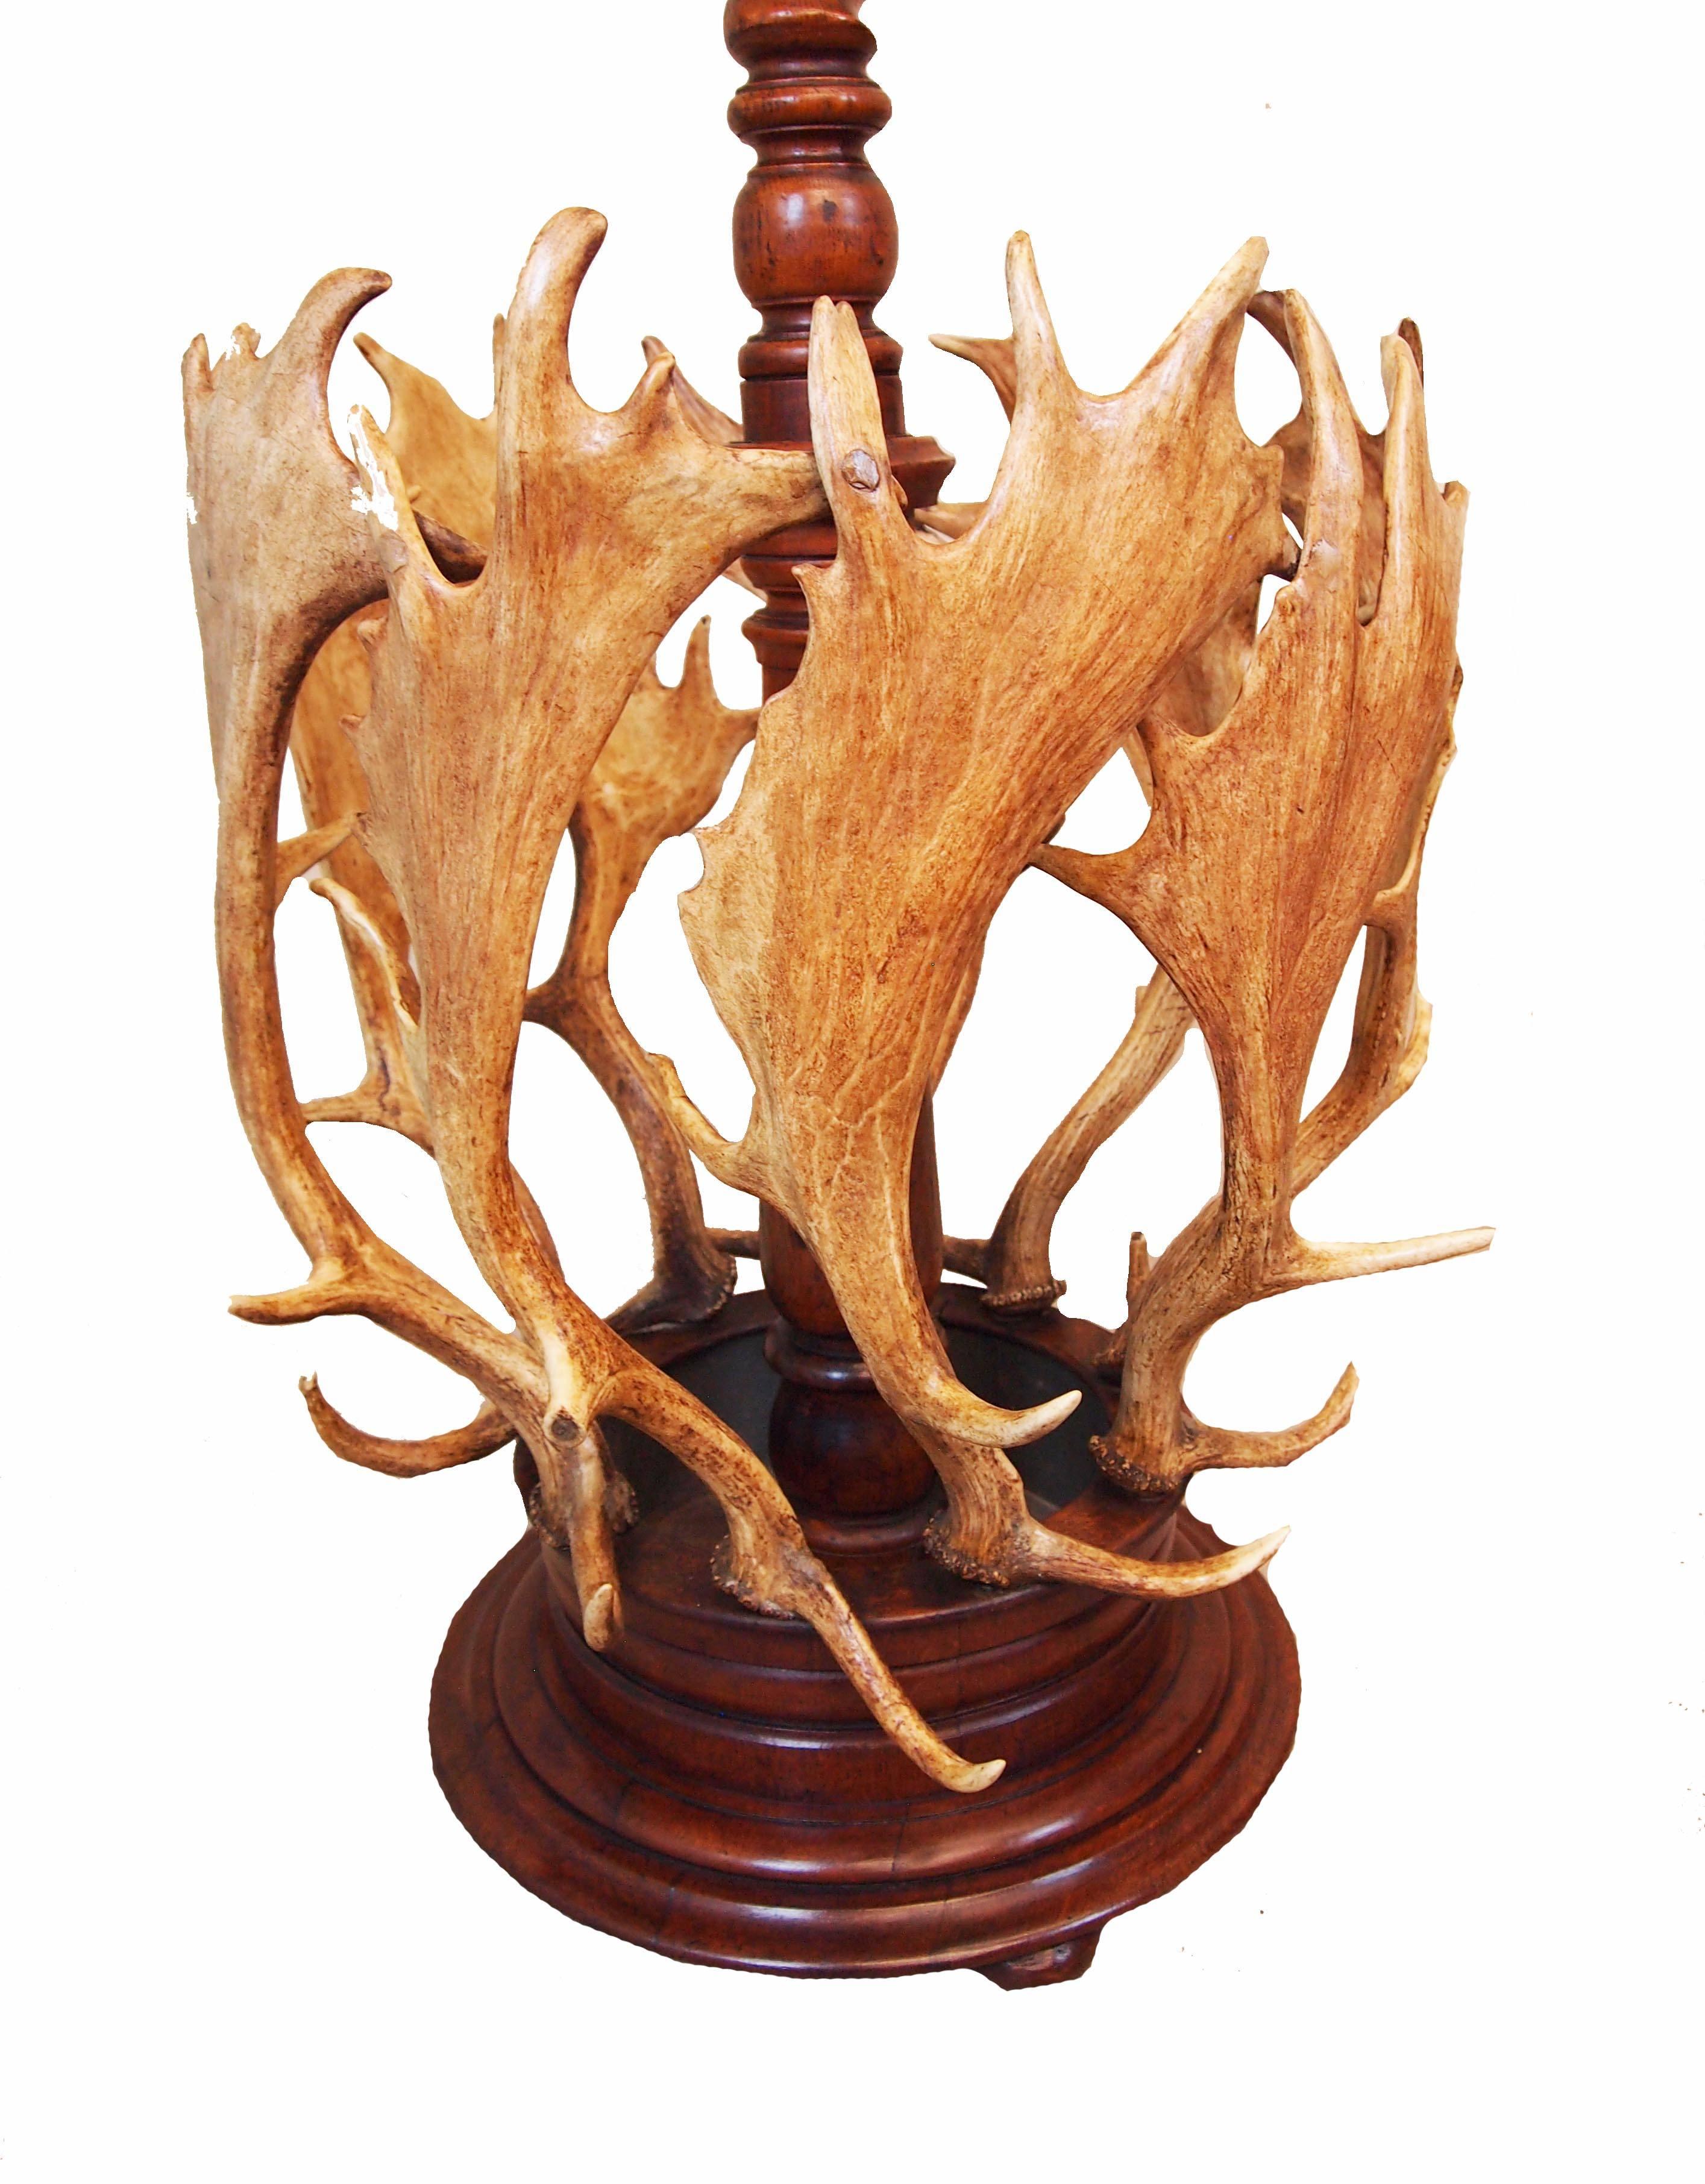 A rare mid-19th century oak and antler hallstand having central barley twist turned
Upright support with applied fallow deer antler branches above cylindrical
Base with interlocking upright antlers and lead lined drip tray

Patented design